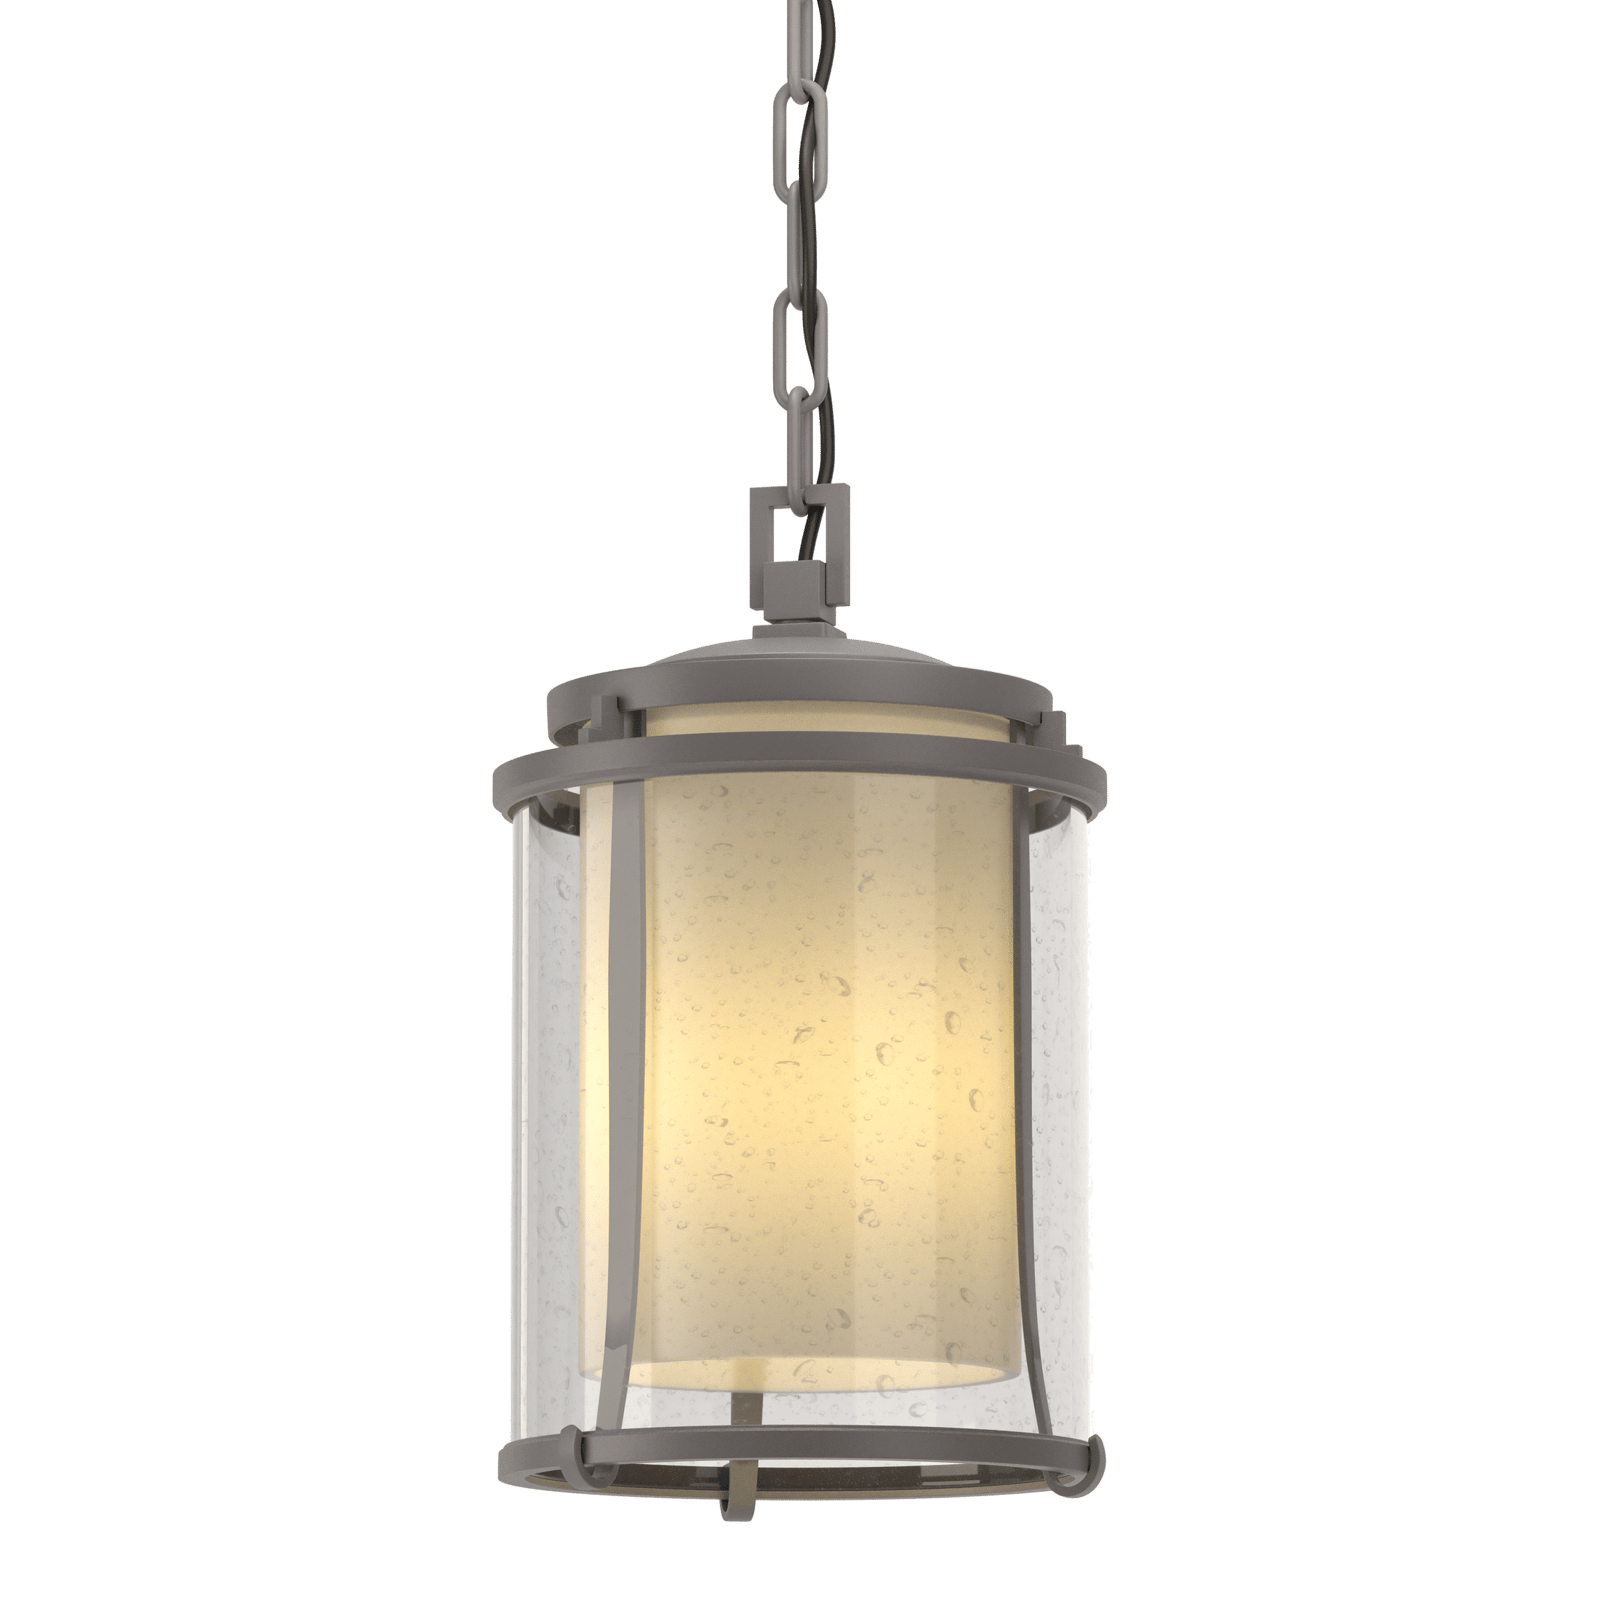 Hubbardton Forge Meridian Outdoor Ceiling Fixture Outdoor l Wall Hubbardton Forge Coastal Burnished Steel Seeded Glass with Opal Diffuser (ZS) 